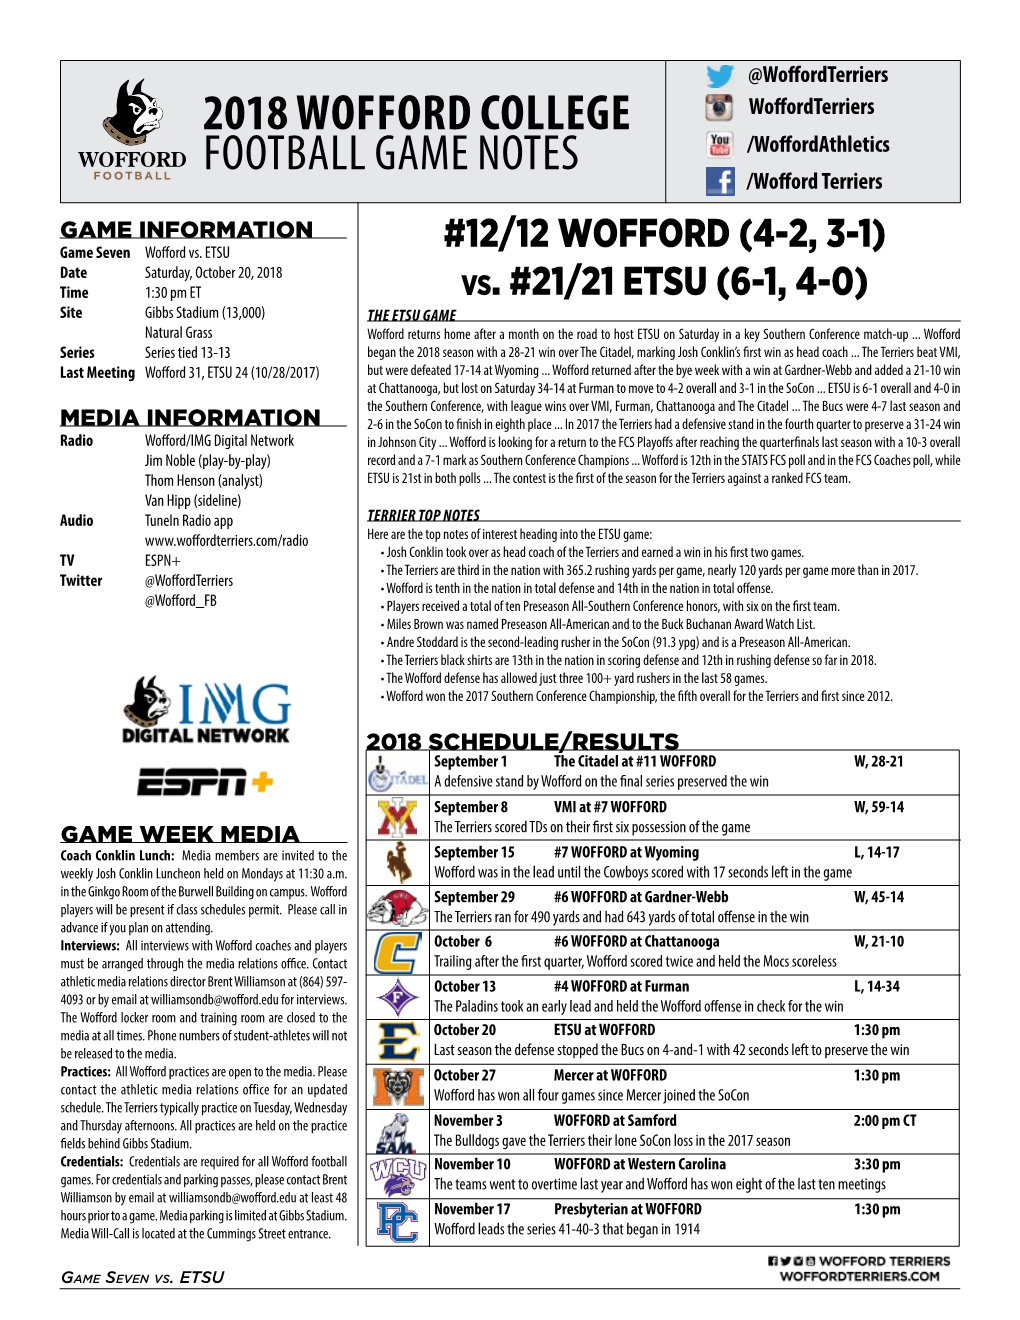 2018 Wofford College Football Game Notes